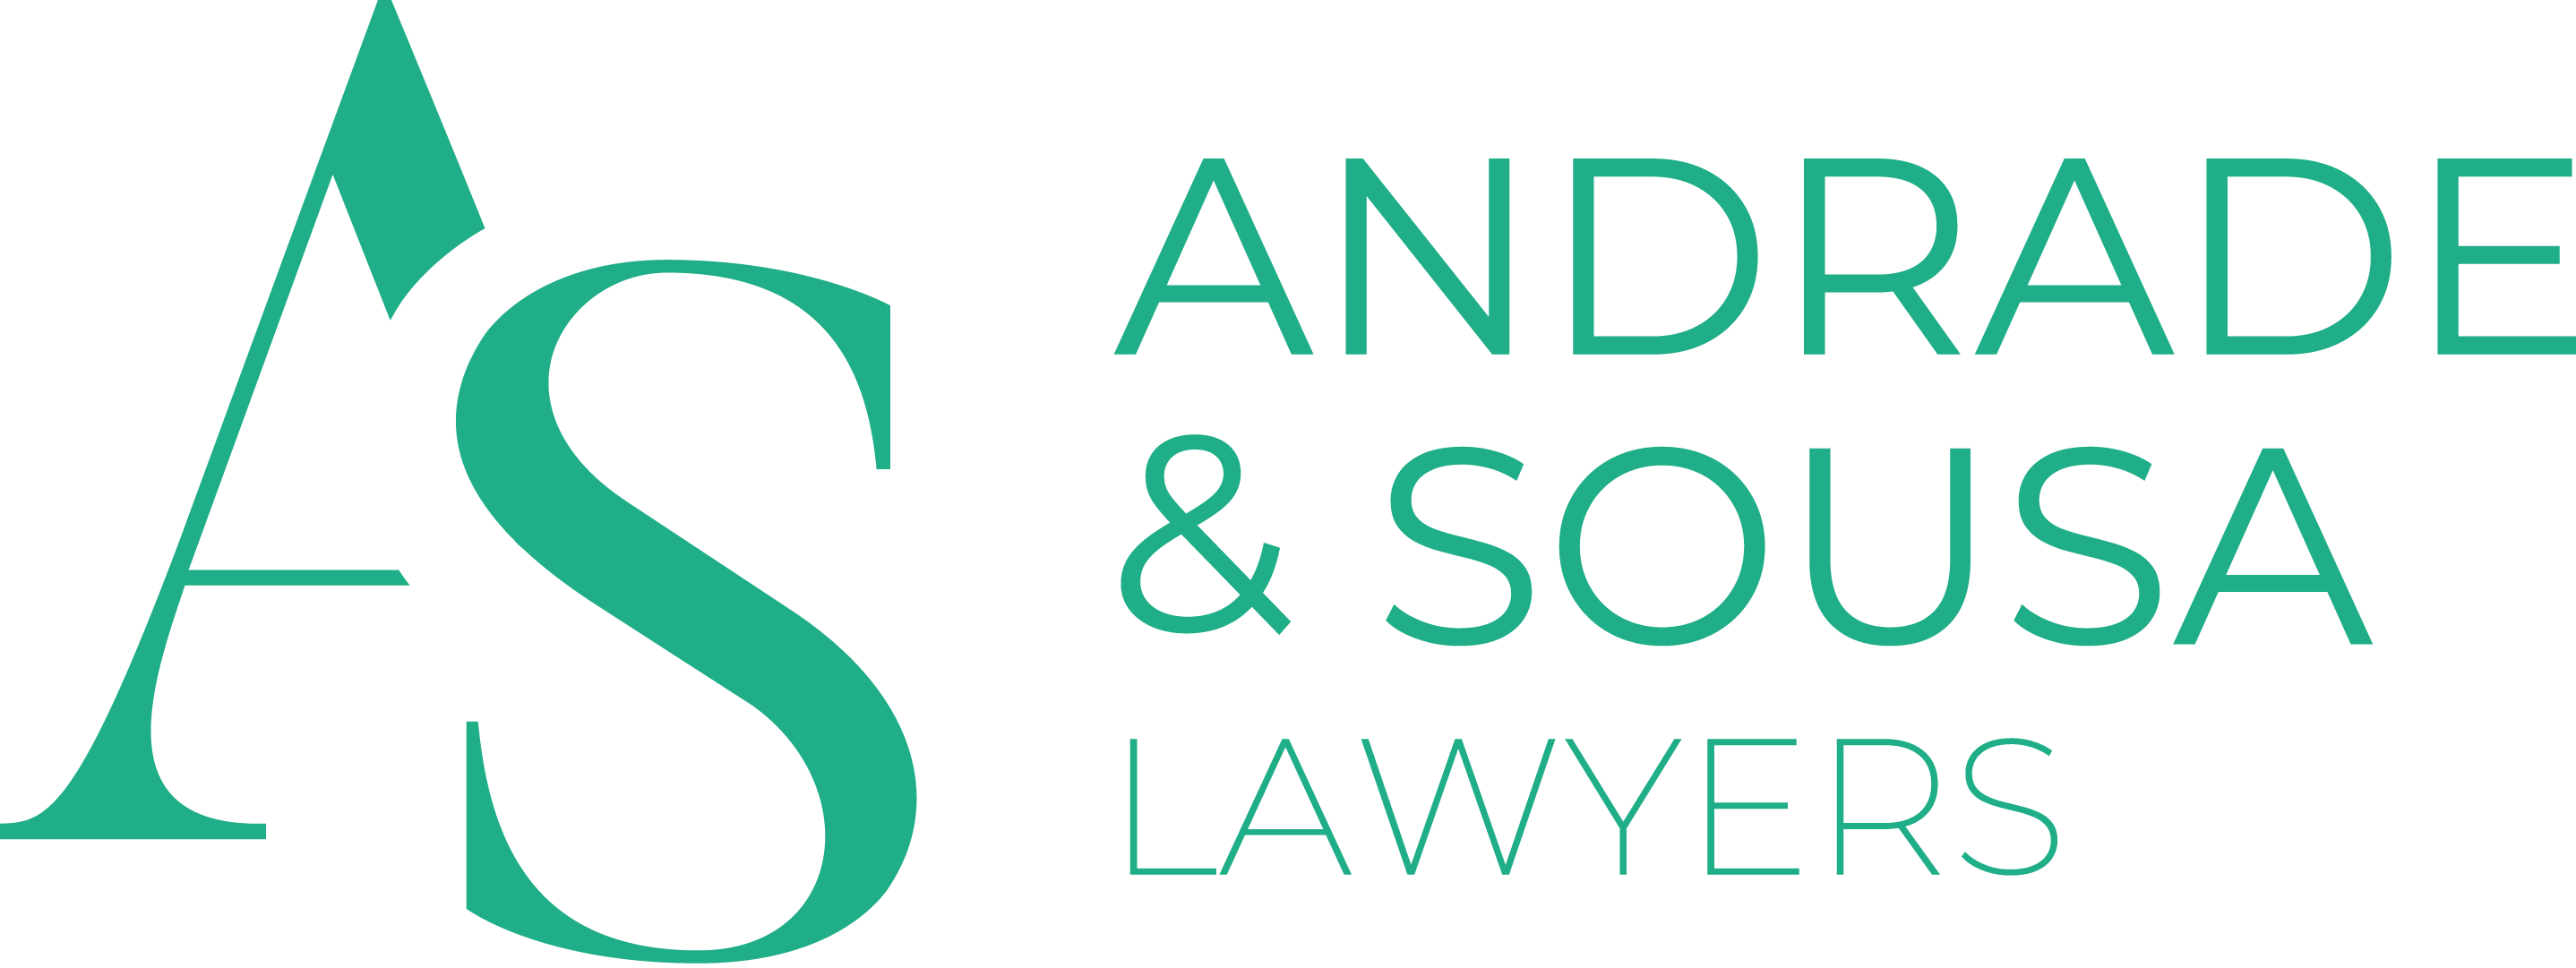 AS Lawyers